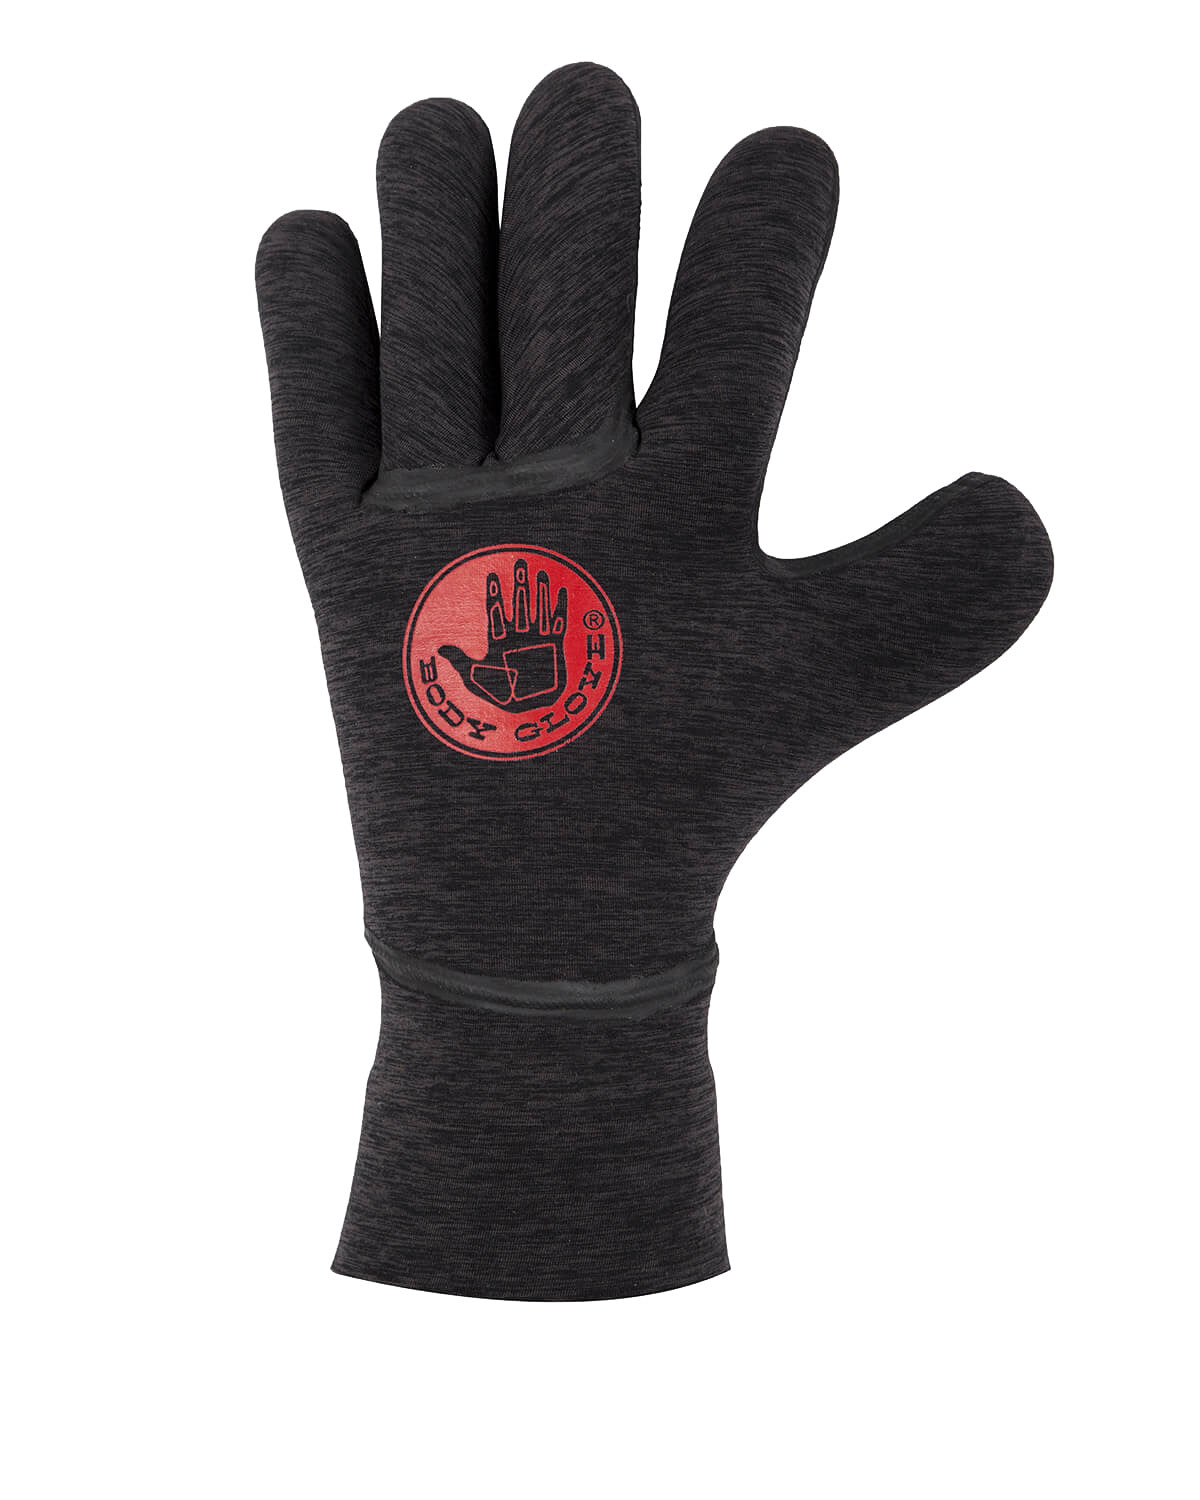 5mm Body Glove RED CELL Wetsuit Gloves